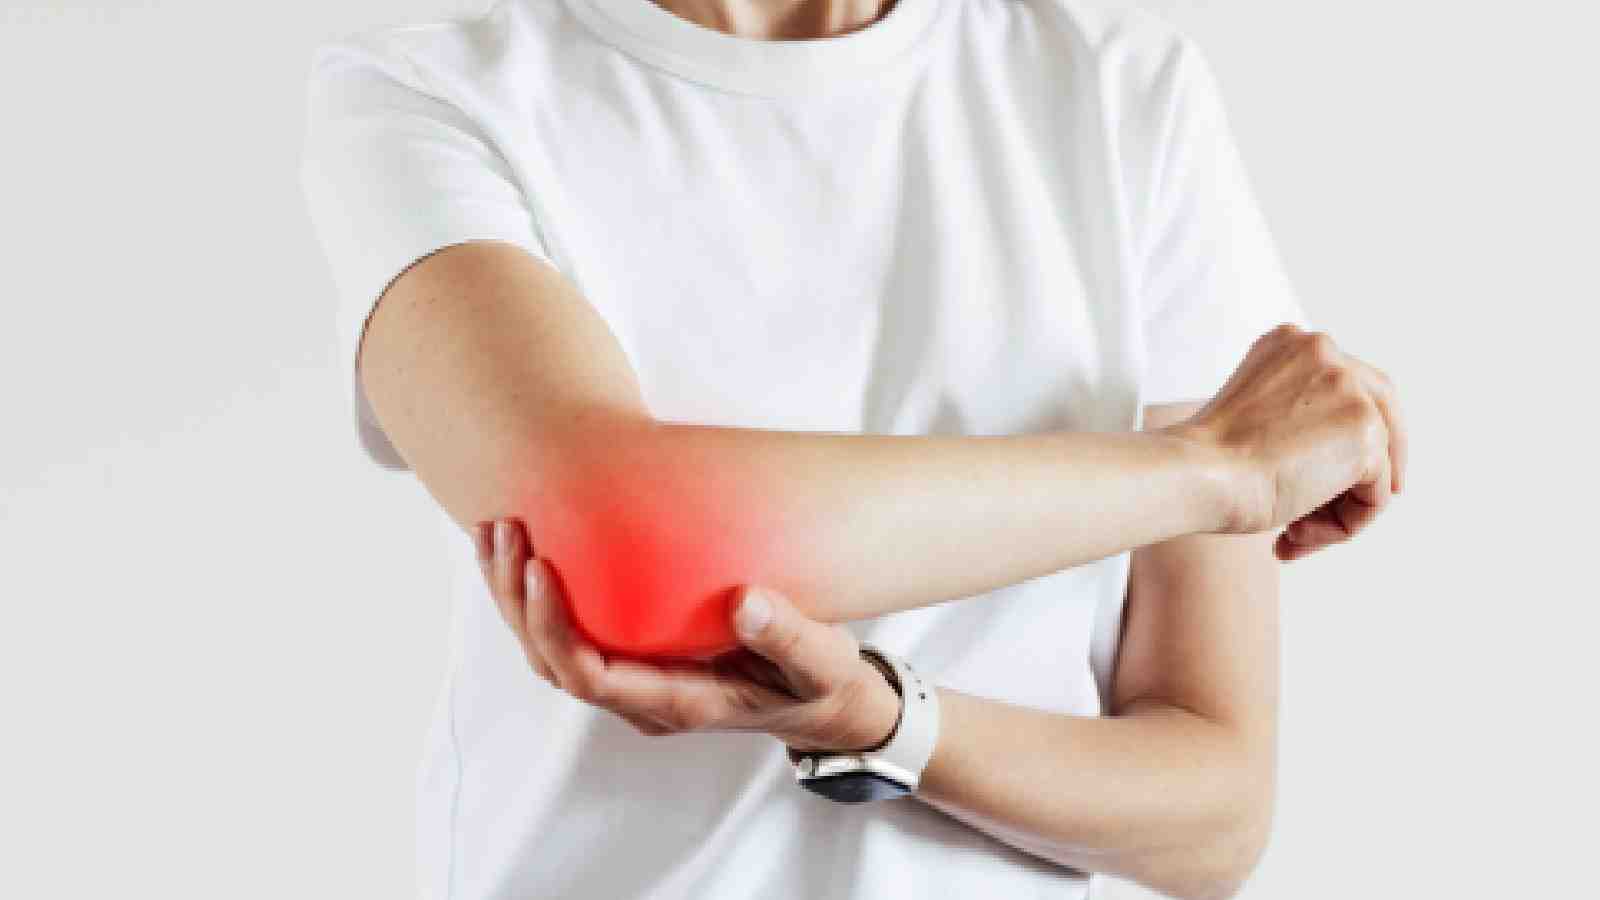 From Neck to Knee: 7 Kitchen Ingredients to Relieve Pain